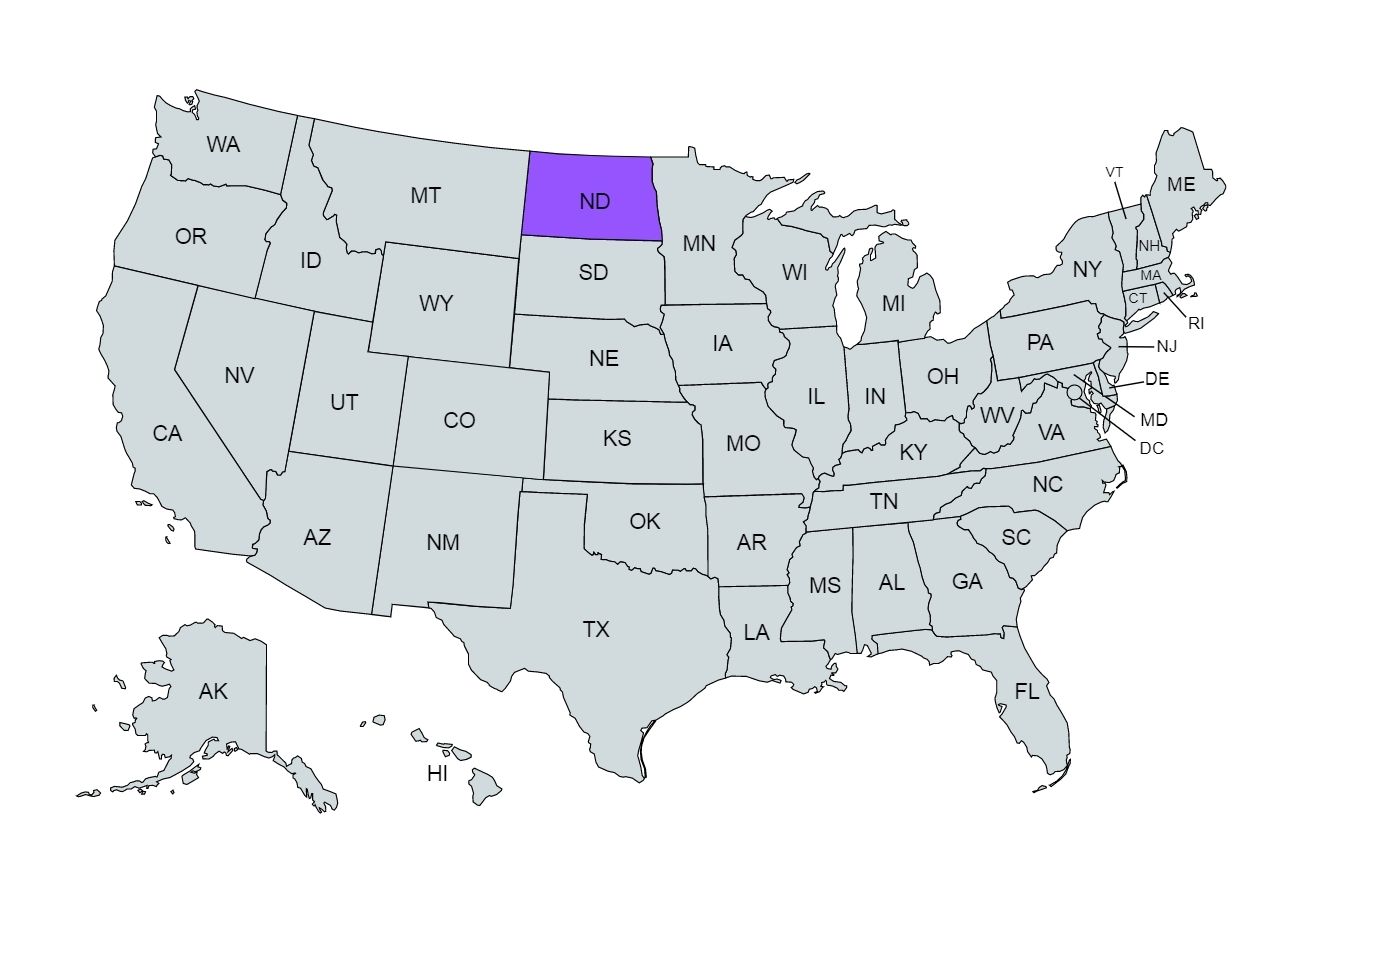 The US map with the North Dakota state marked in purple